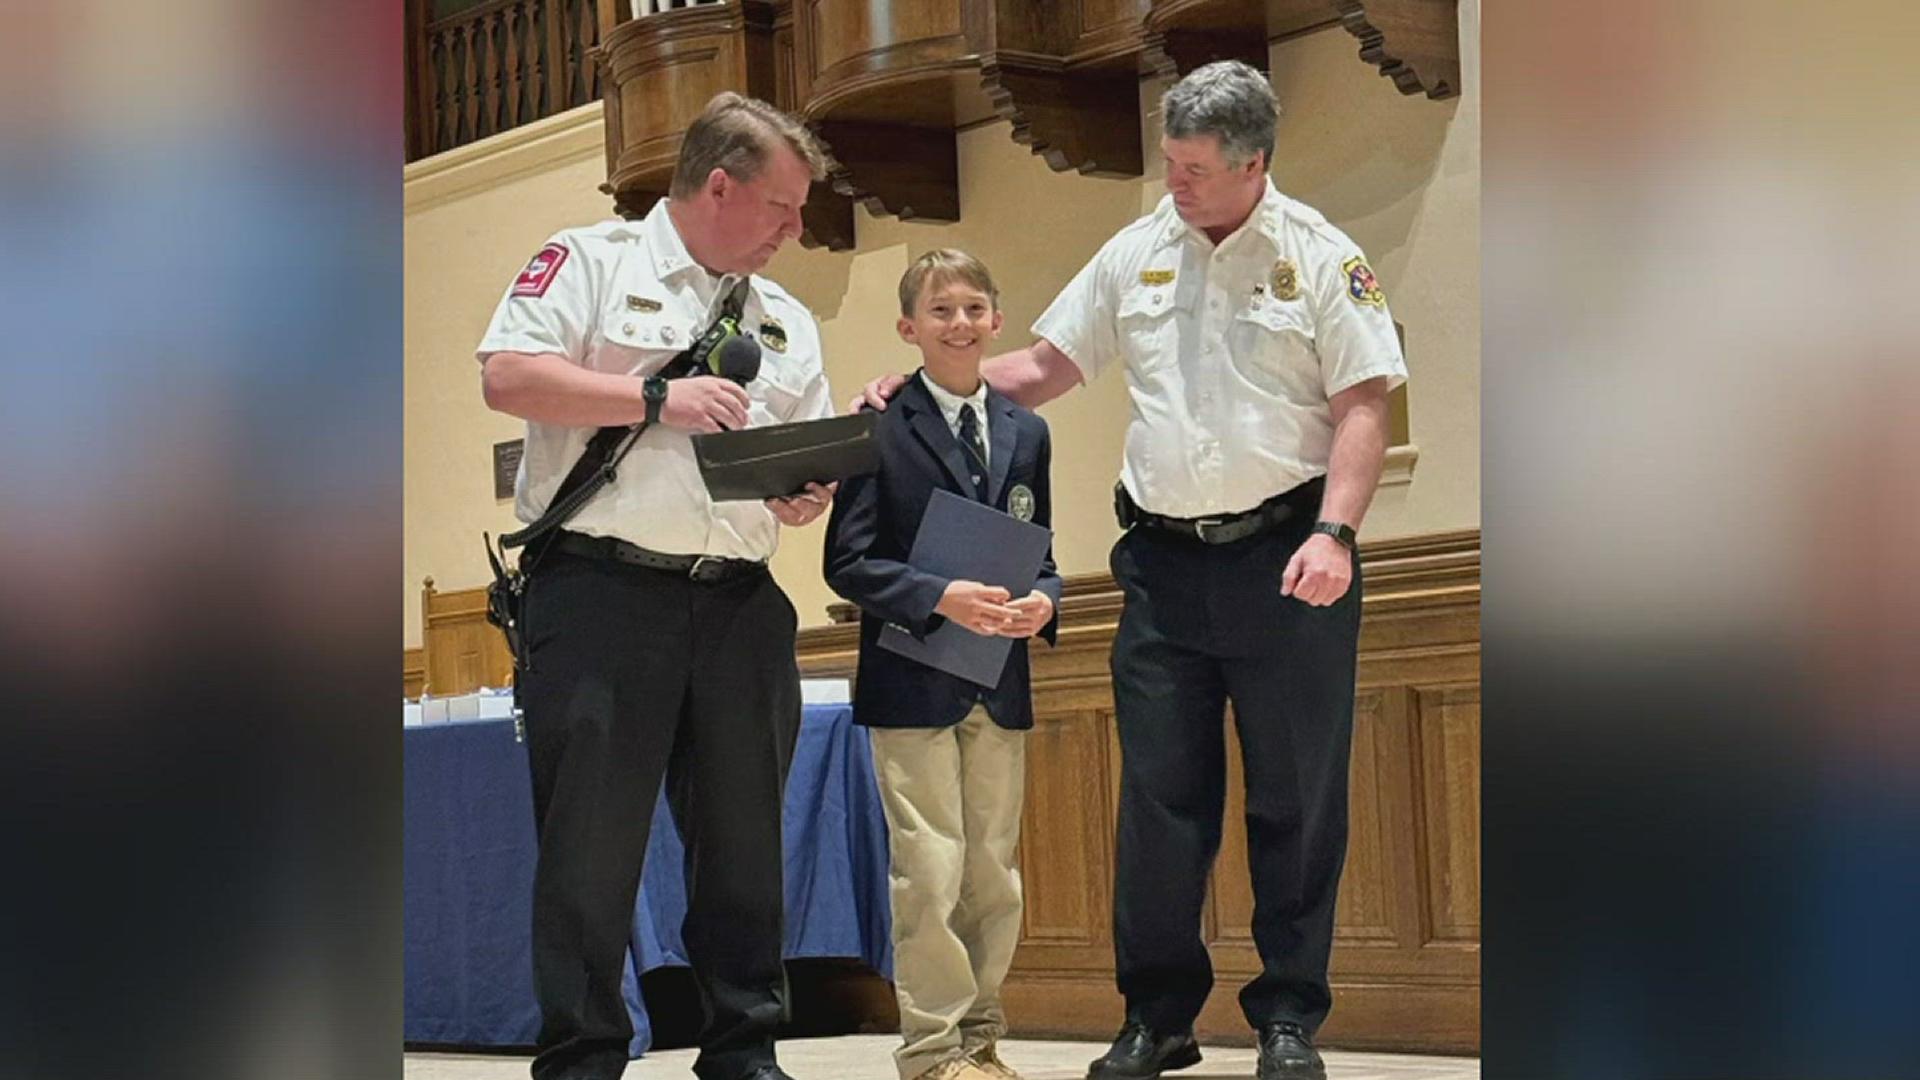 CCFD presented Hunter Shaw with a 'Certificate of Merit' for his heroic action performing the Heimlich maneuver on a classmate who was choking, saving their life.